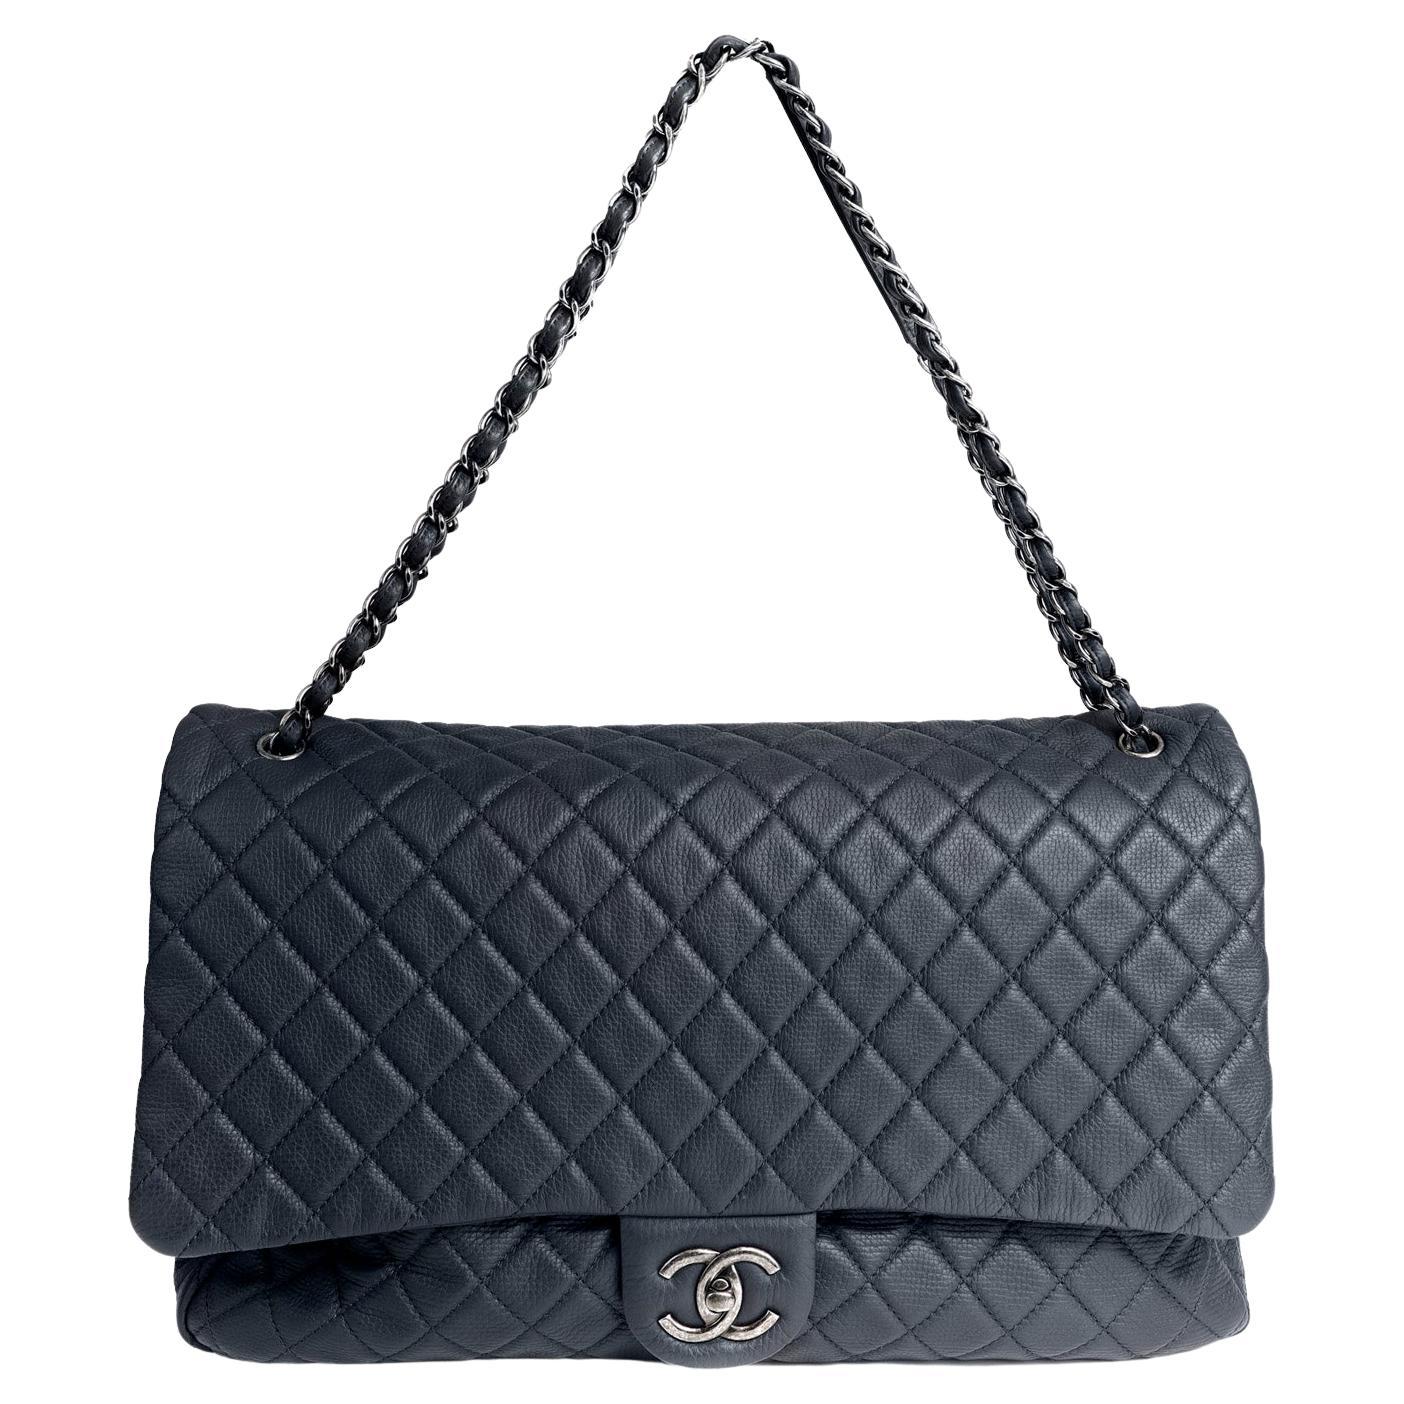 Chanel Navy Xxl Classic Travel Flap Bag For Sale At 1Stdibs | Chanel Travel  Bag, Chanel Xxl Flap Bag, Chanel Xxl Classic Flap Bag